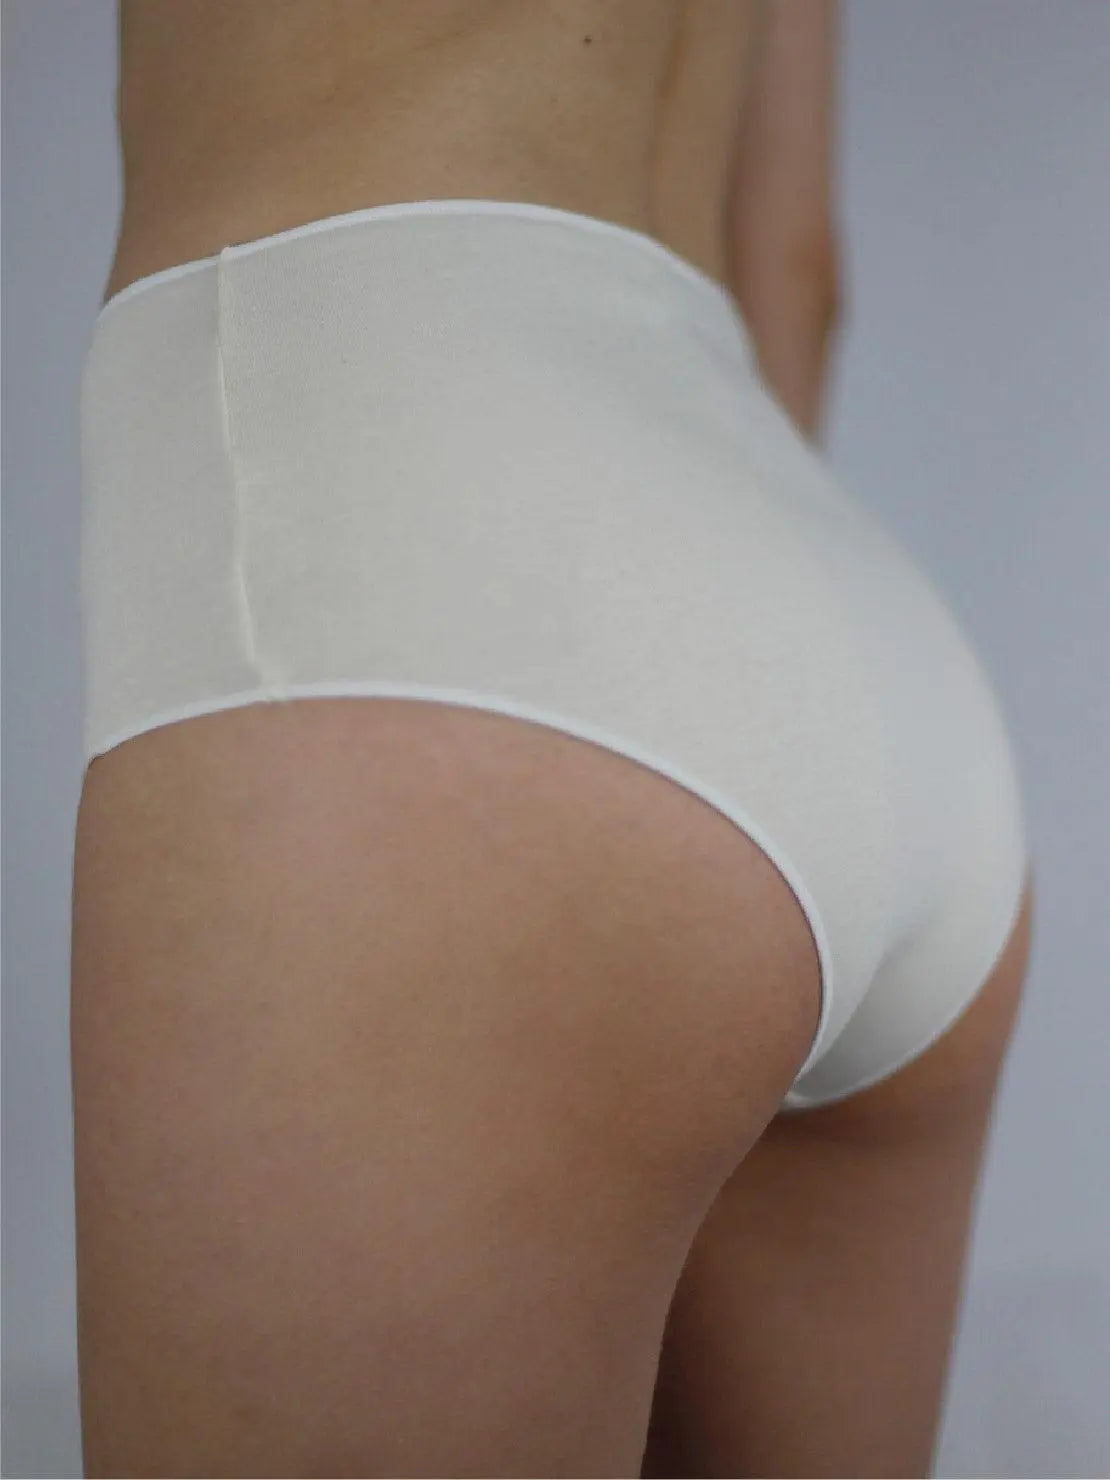 A person is shown from the torso down wearing Ecru Basic Highwaist Organic Cotton Briefs - Talk Under Light and a banded white bralette. The background is neutral, focusing attention on the minimalist undergarments available at Bassalstore in Barcelona.